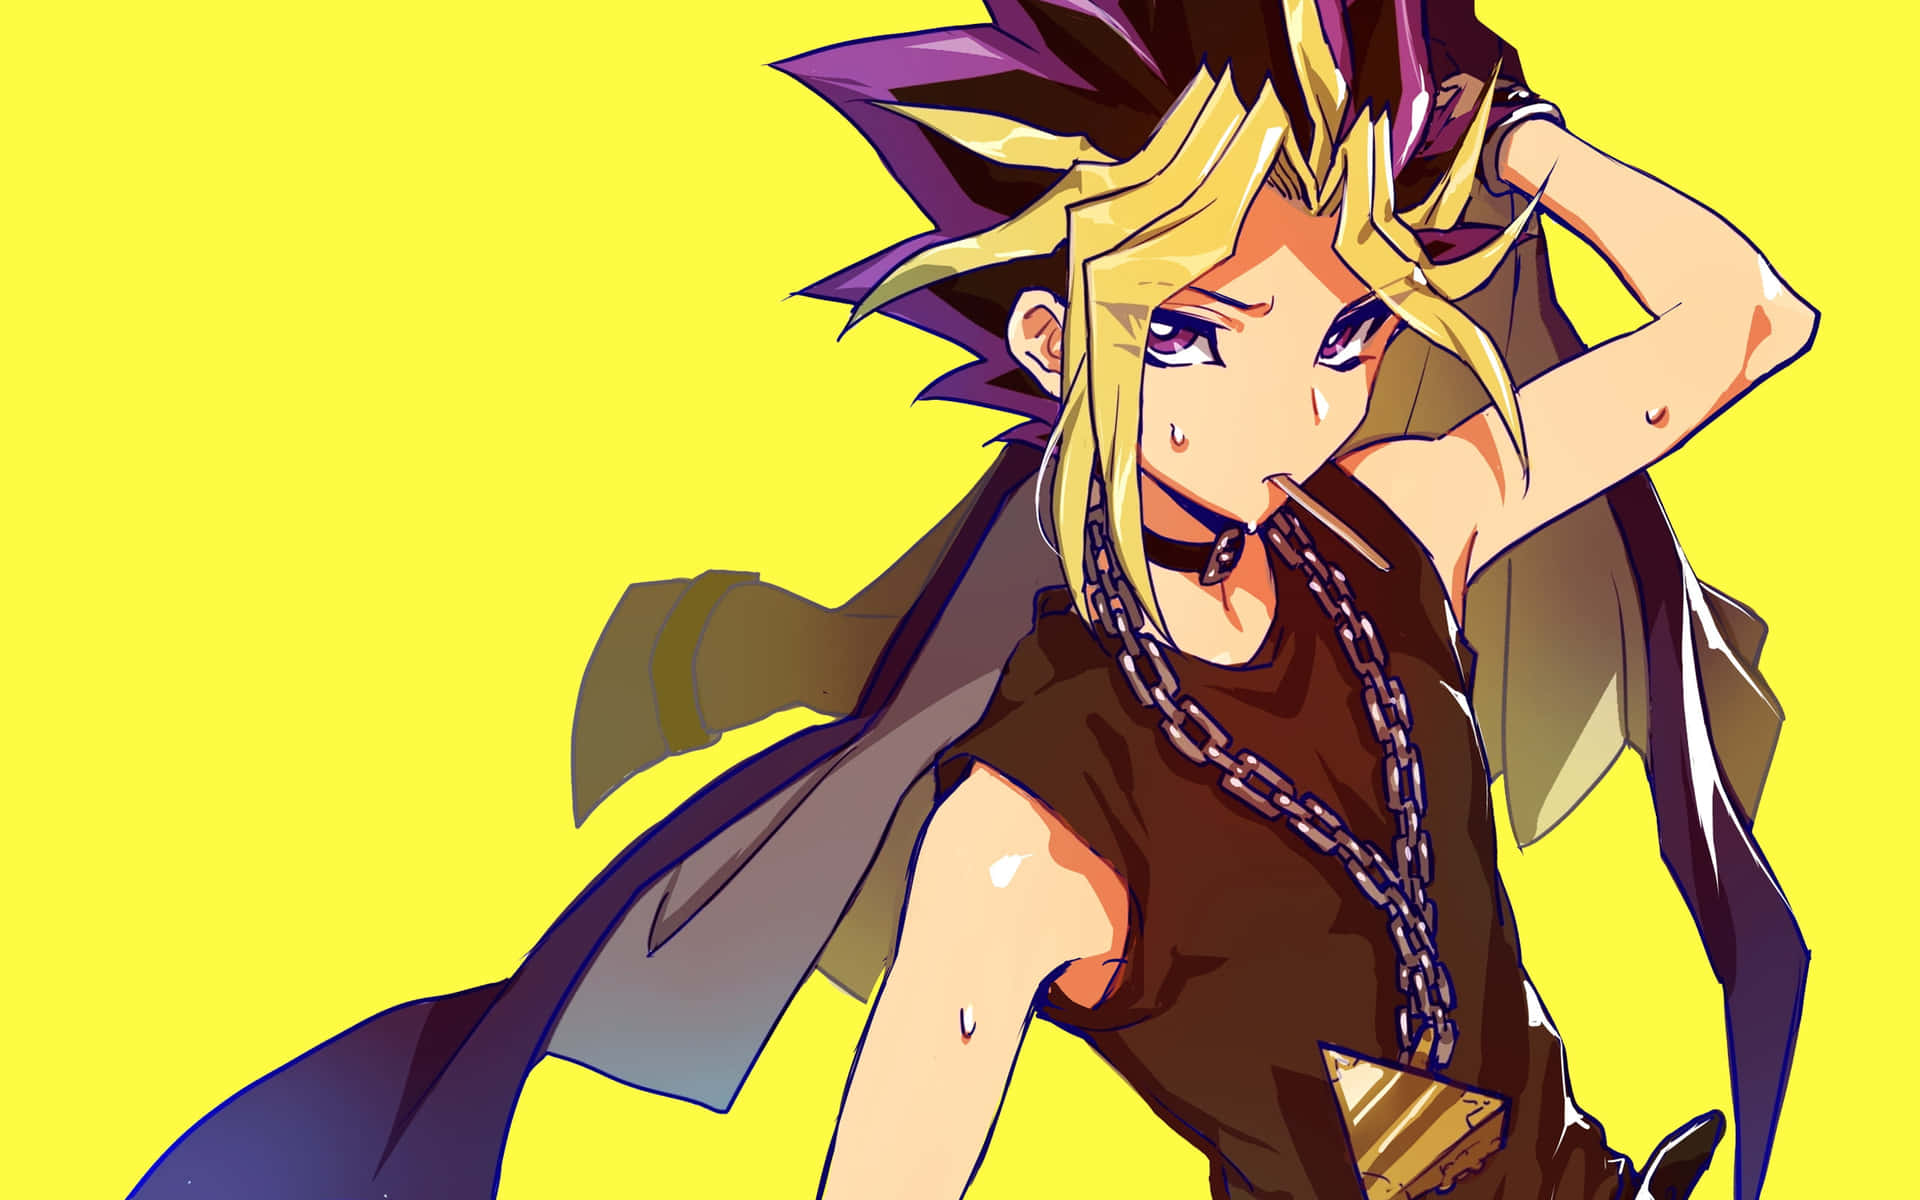 Yami Yugi - The Ultimate Duelist in Action Wallpaper